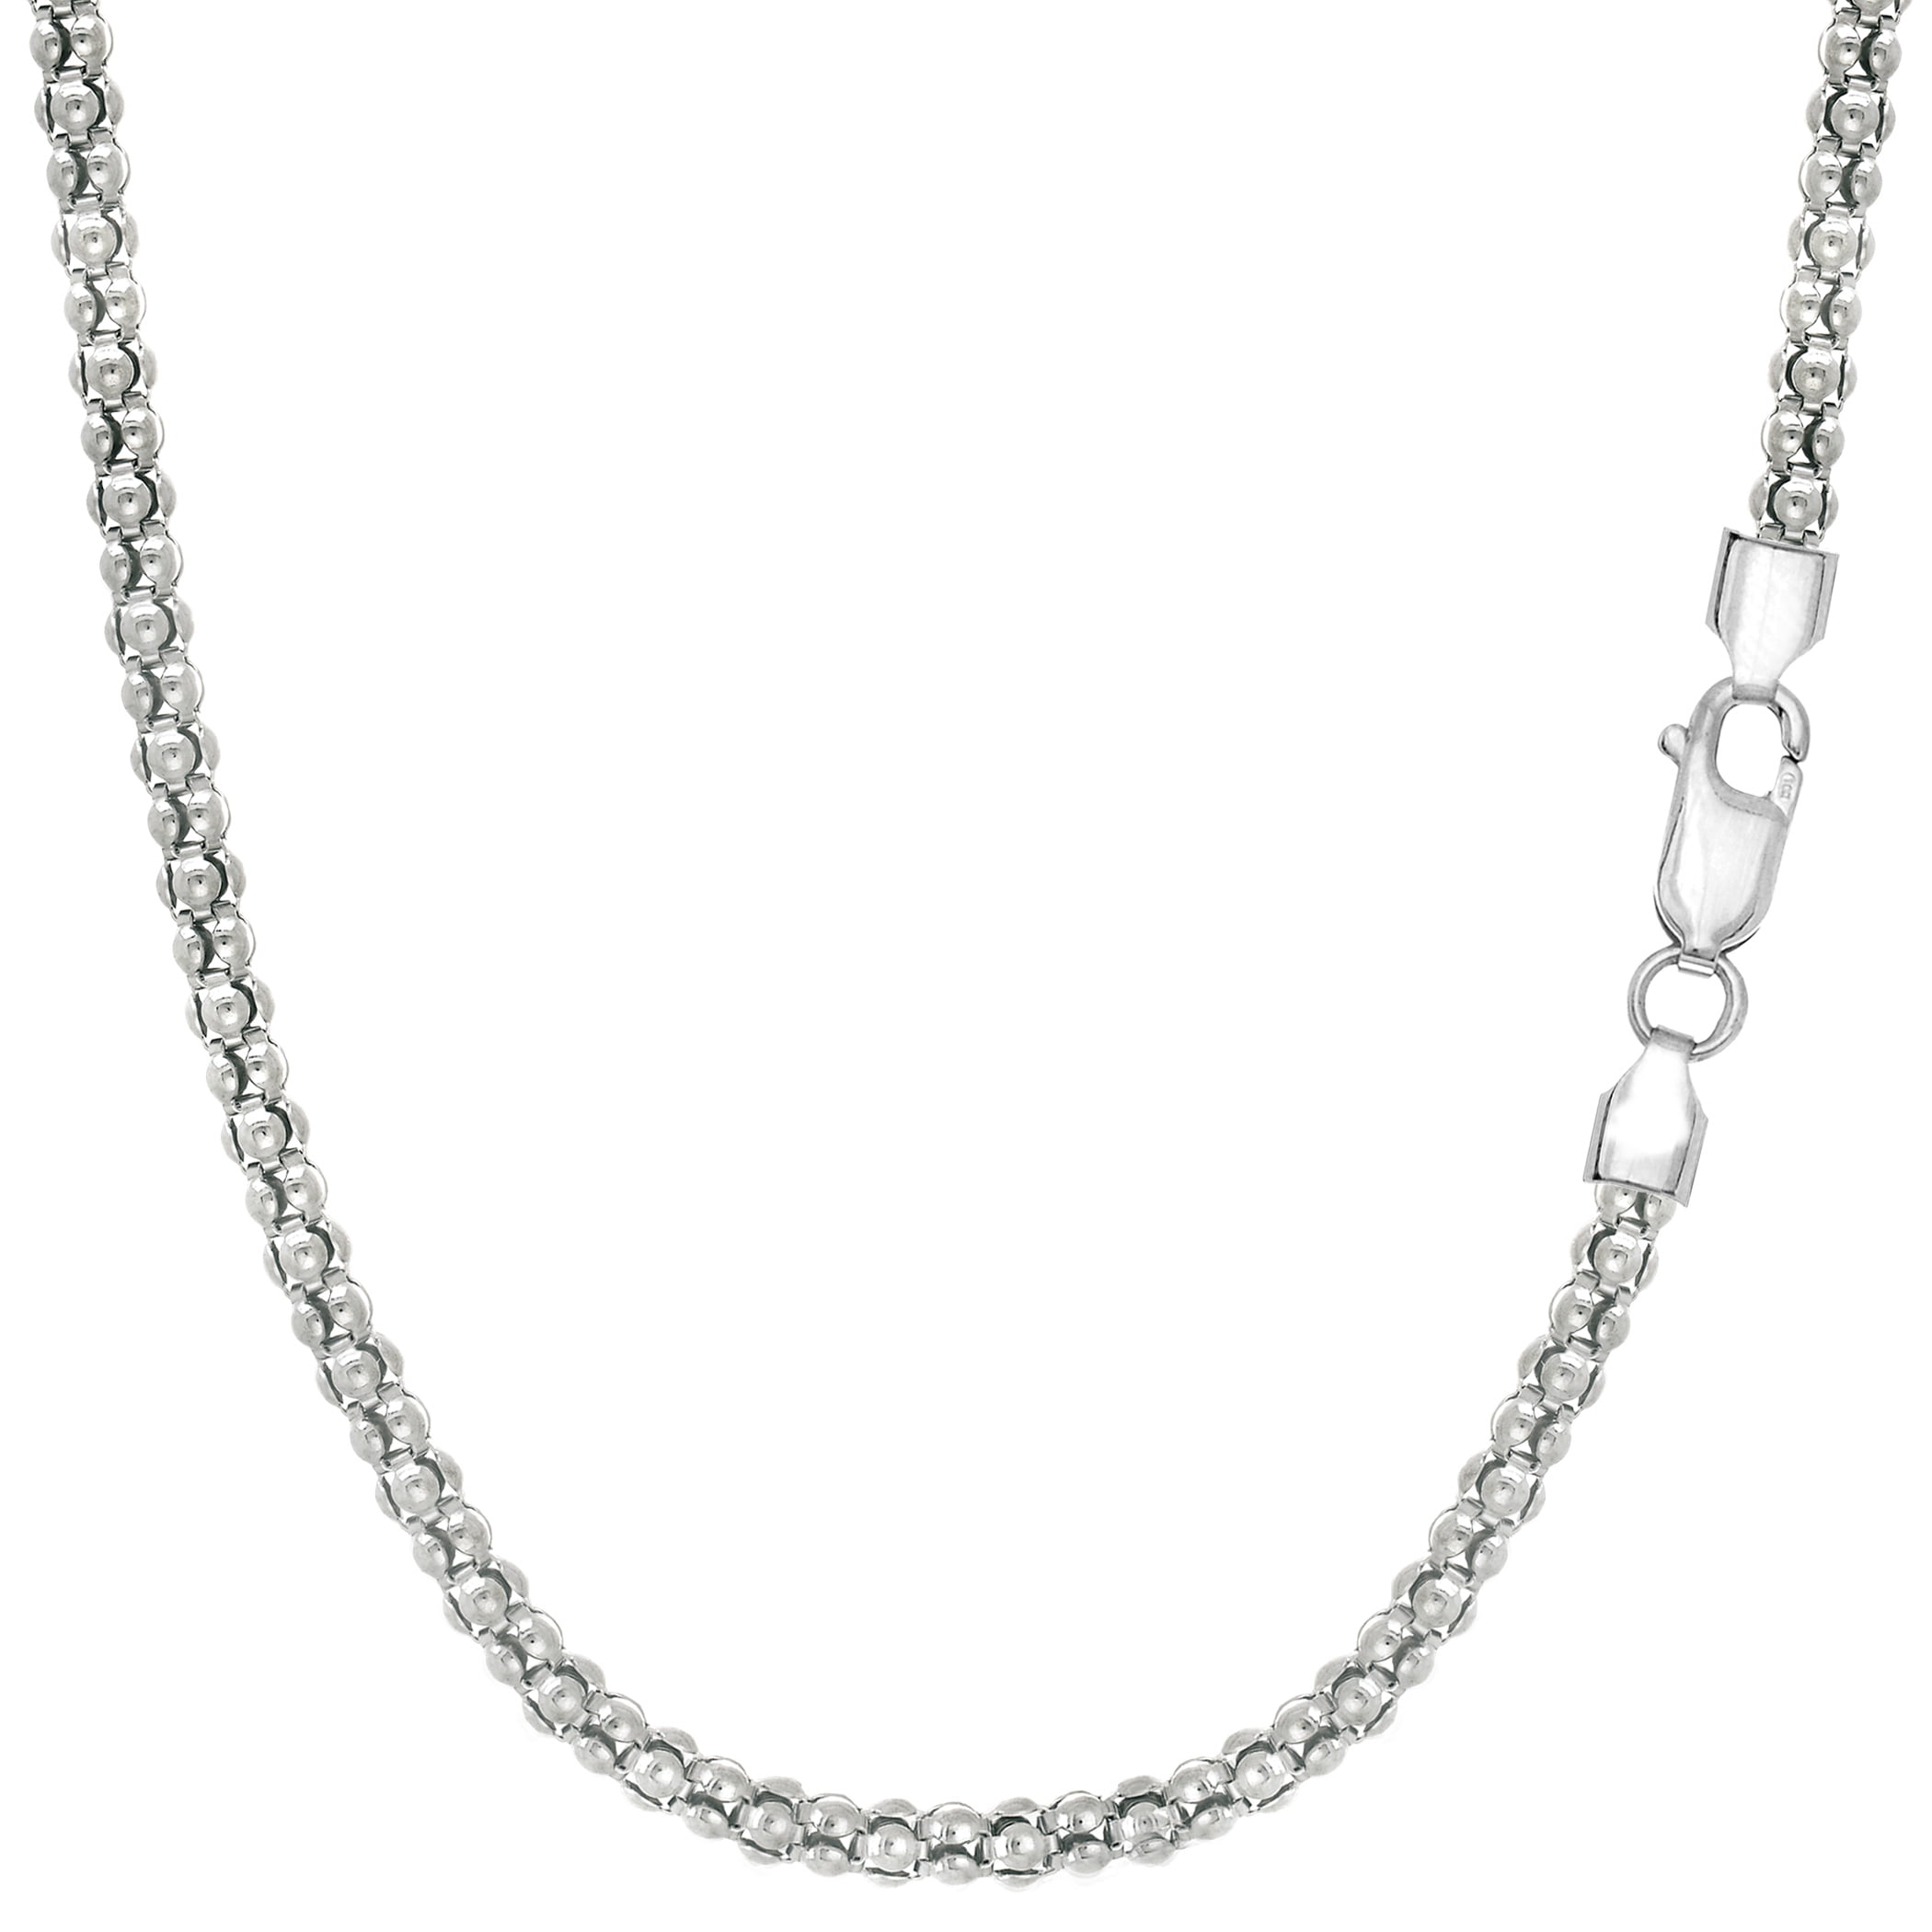 2.5mm Sterling Silver Rhodium Plated Fancy Popcorn Rope Chain Necklace